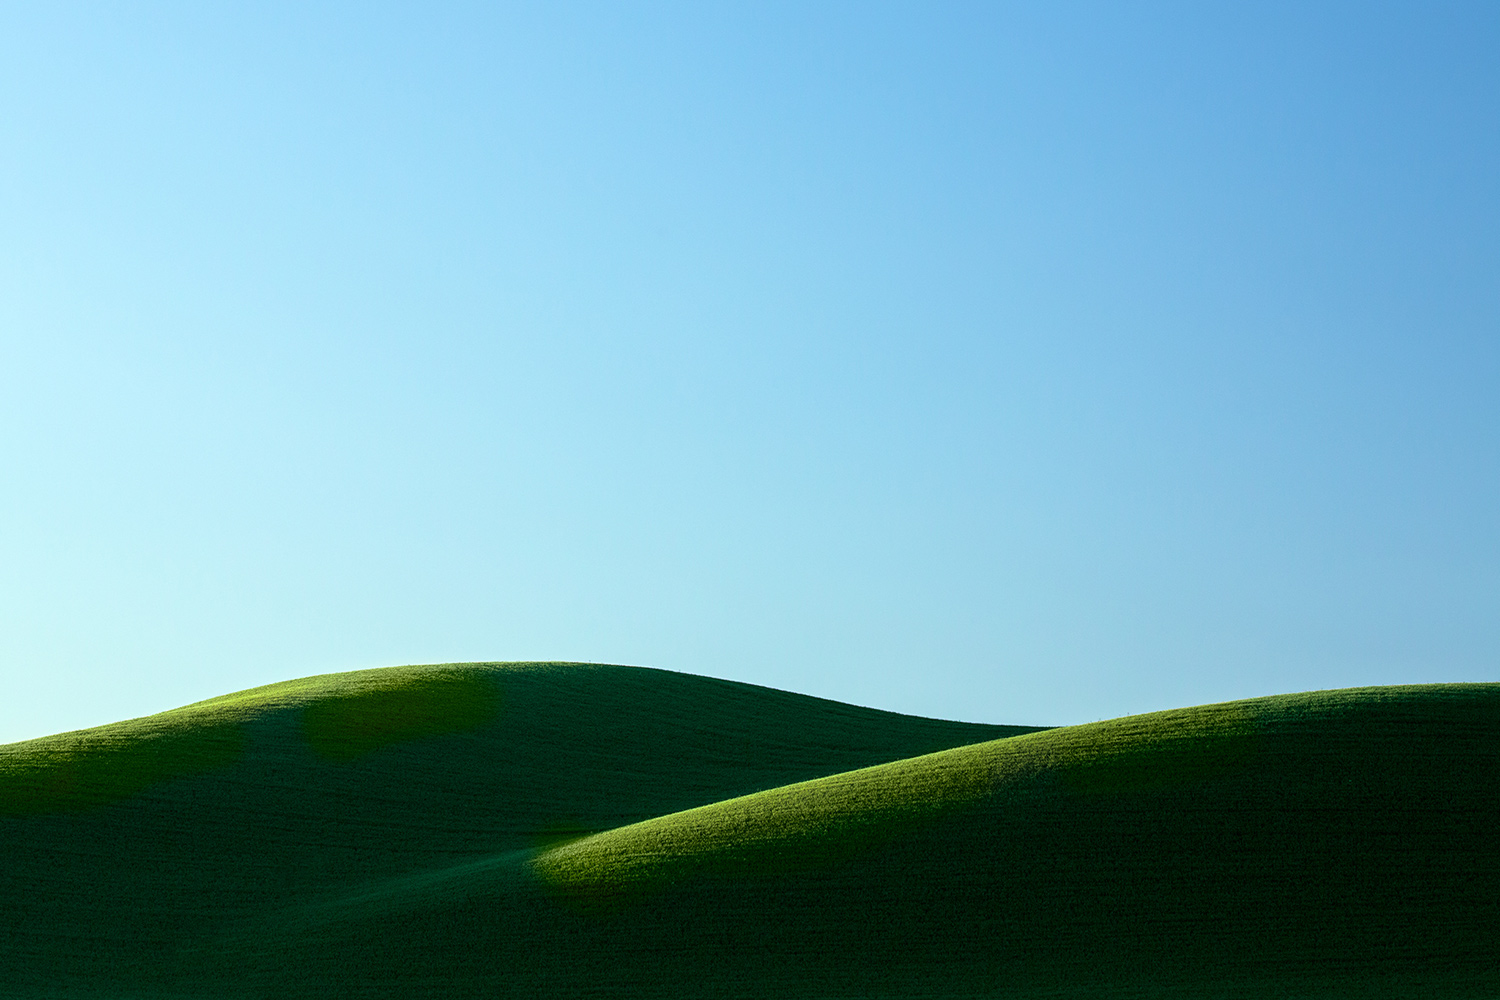 20+ photos of abstract landscapes